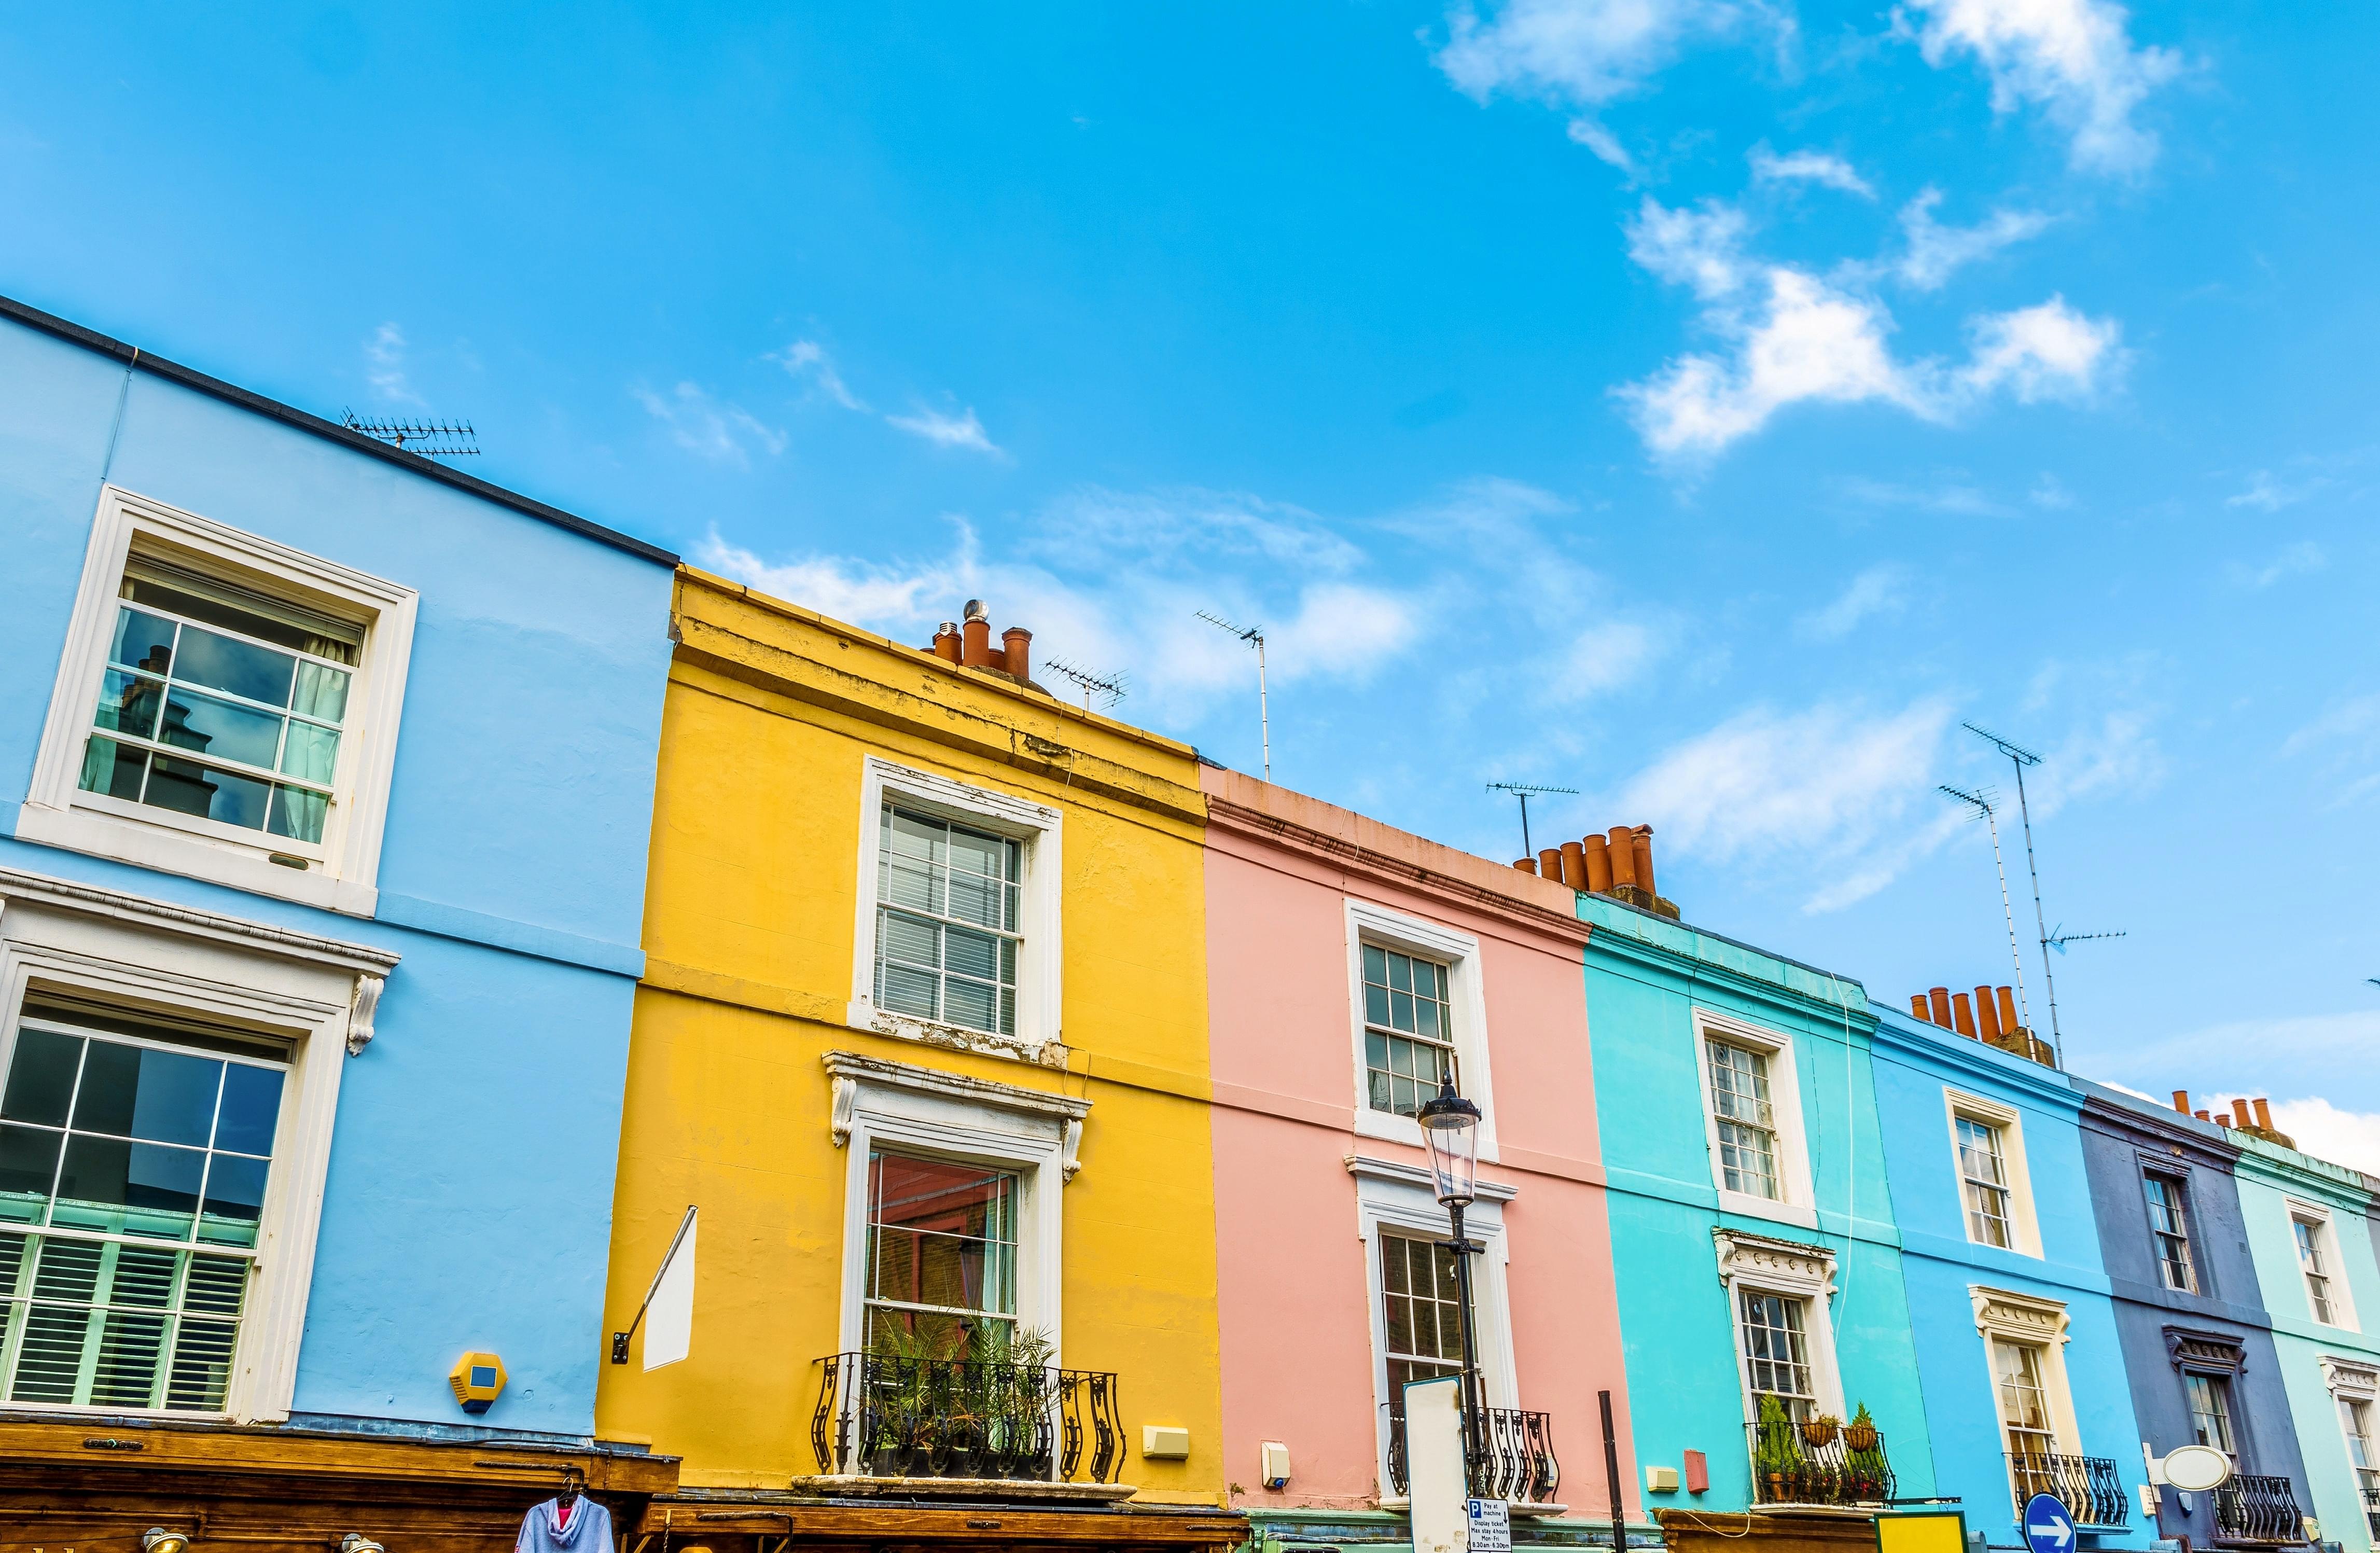 Things To Do In Notting Hill